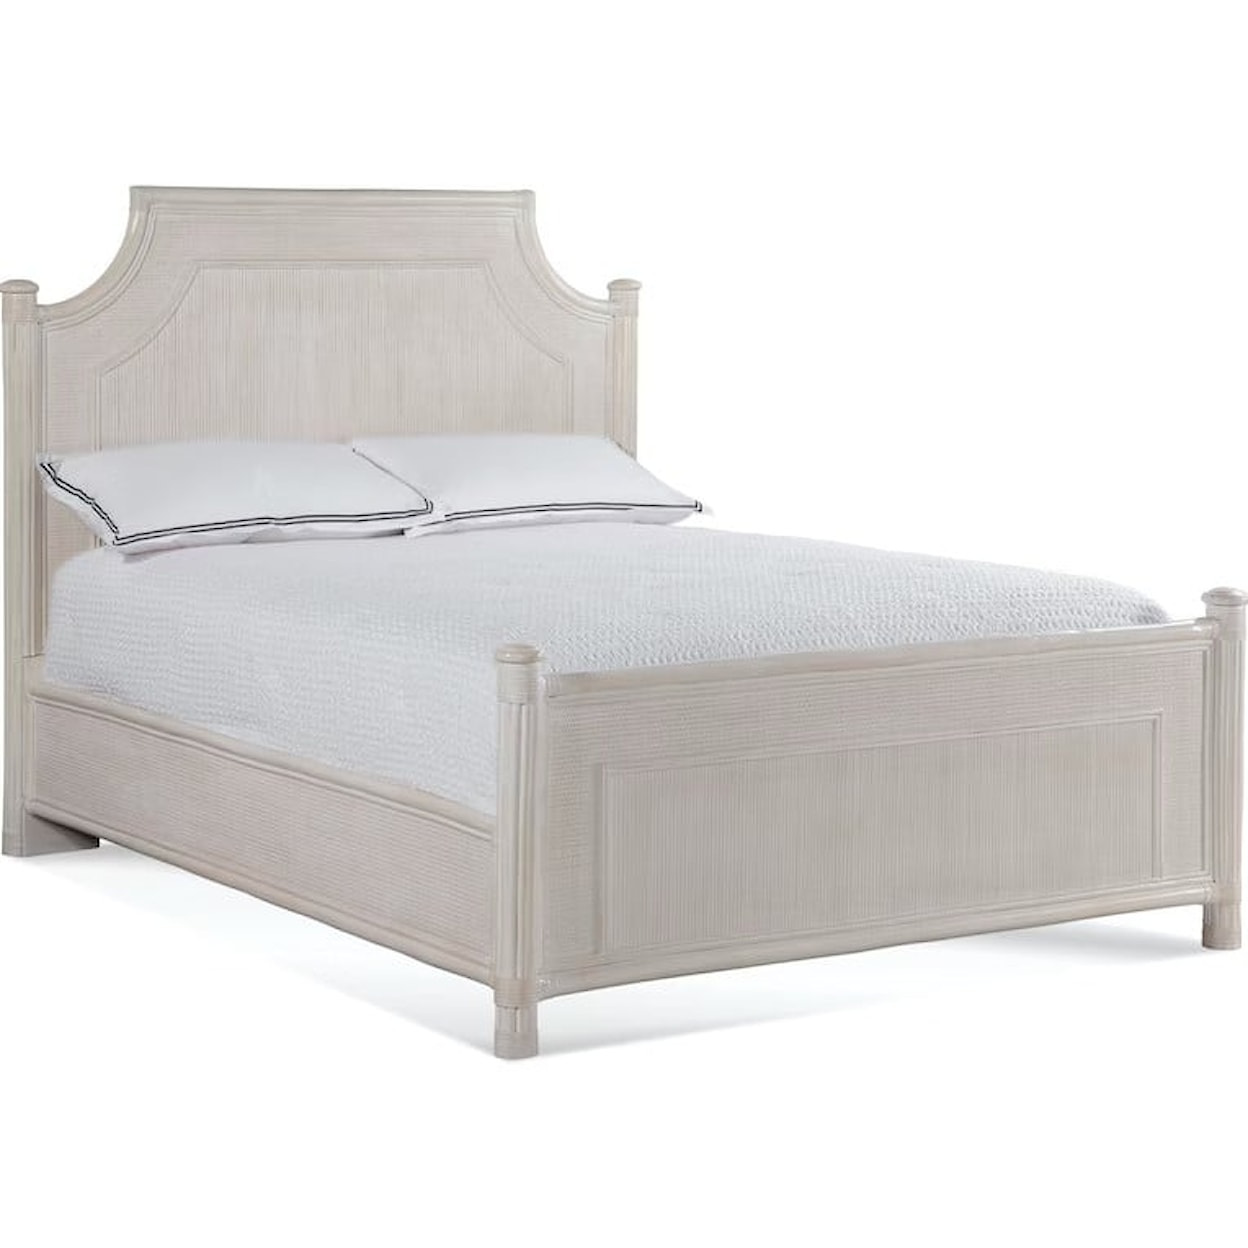 Braxton Culler Summer Retreat King Arched Panel Bed